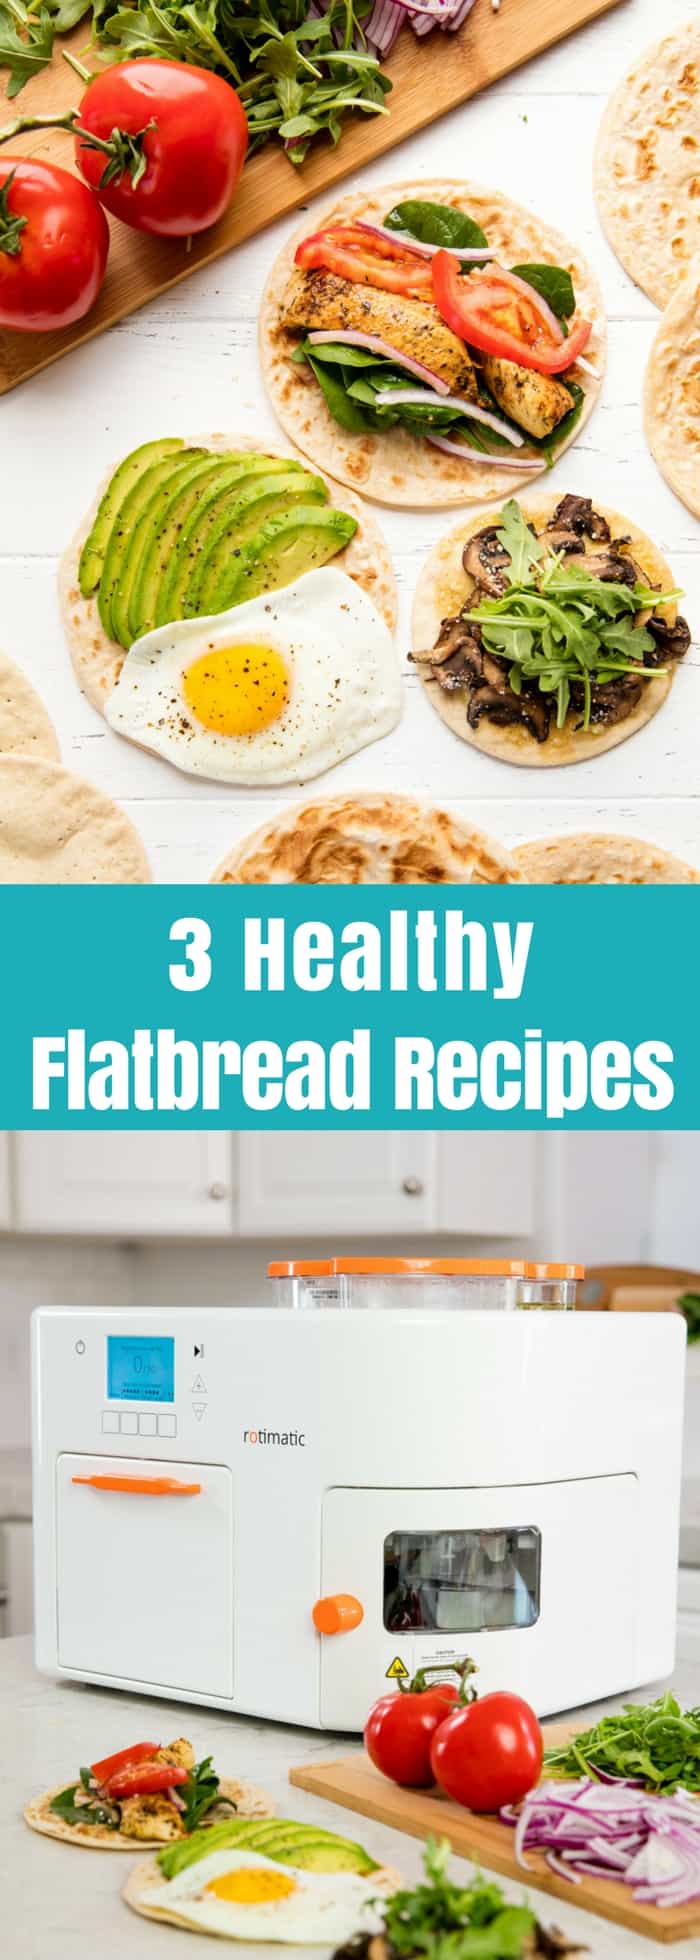 3 Healthy Flatbread Recipes that are perfect for fresh, healthy meal options using the Rotimatic. 